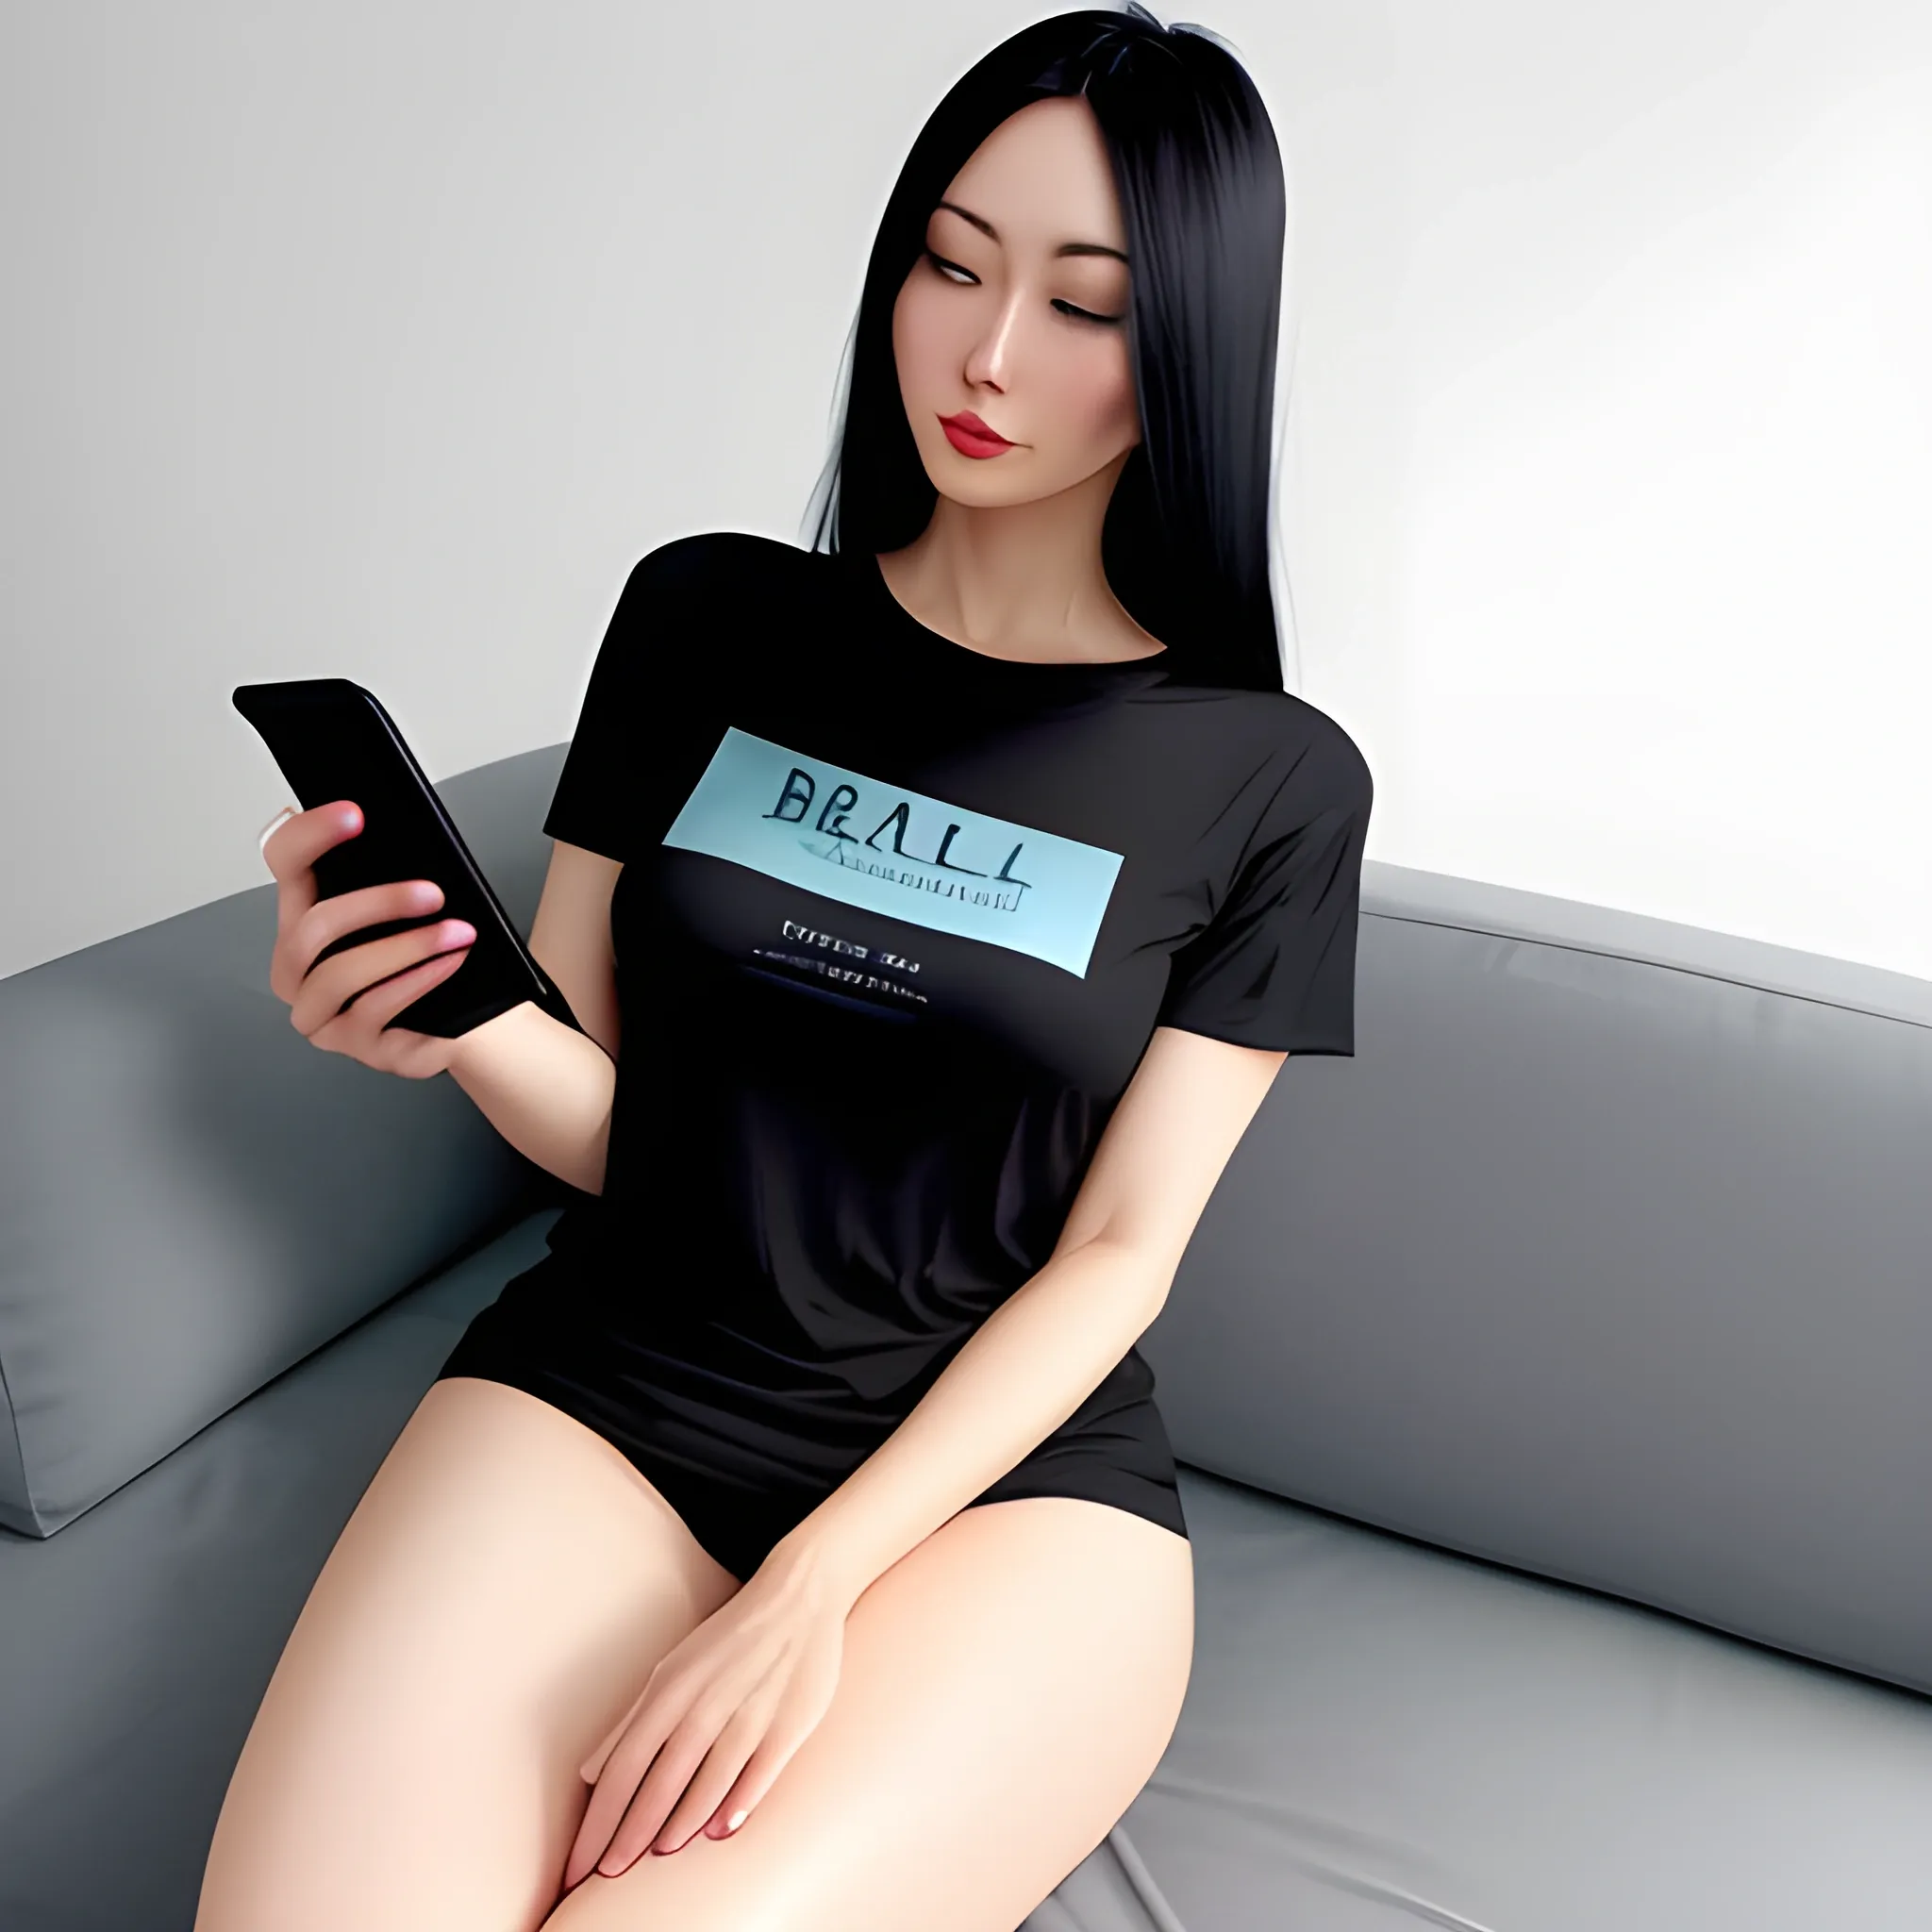 A girl with naked legs chill on sofa. Right leg on the left and smartphone on the right hand, black long hair, light blue t-shirt and black short